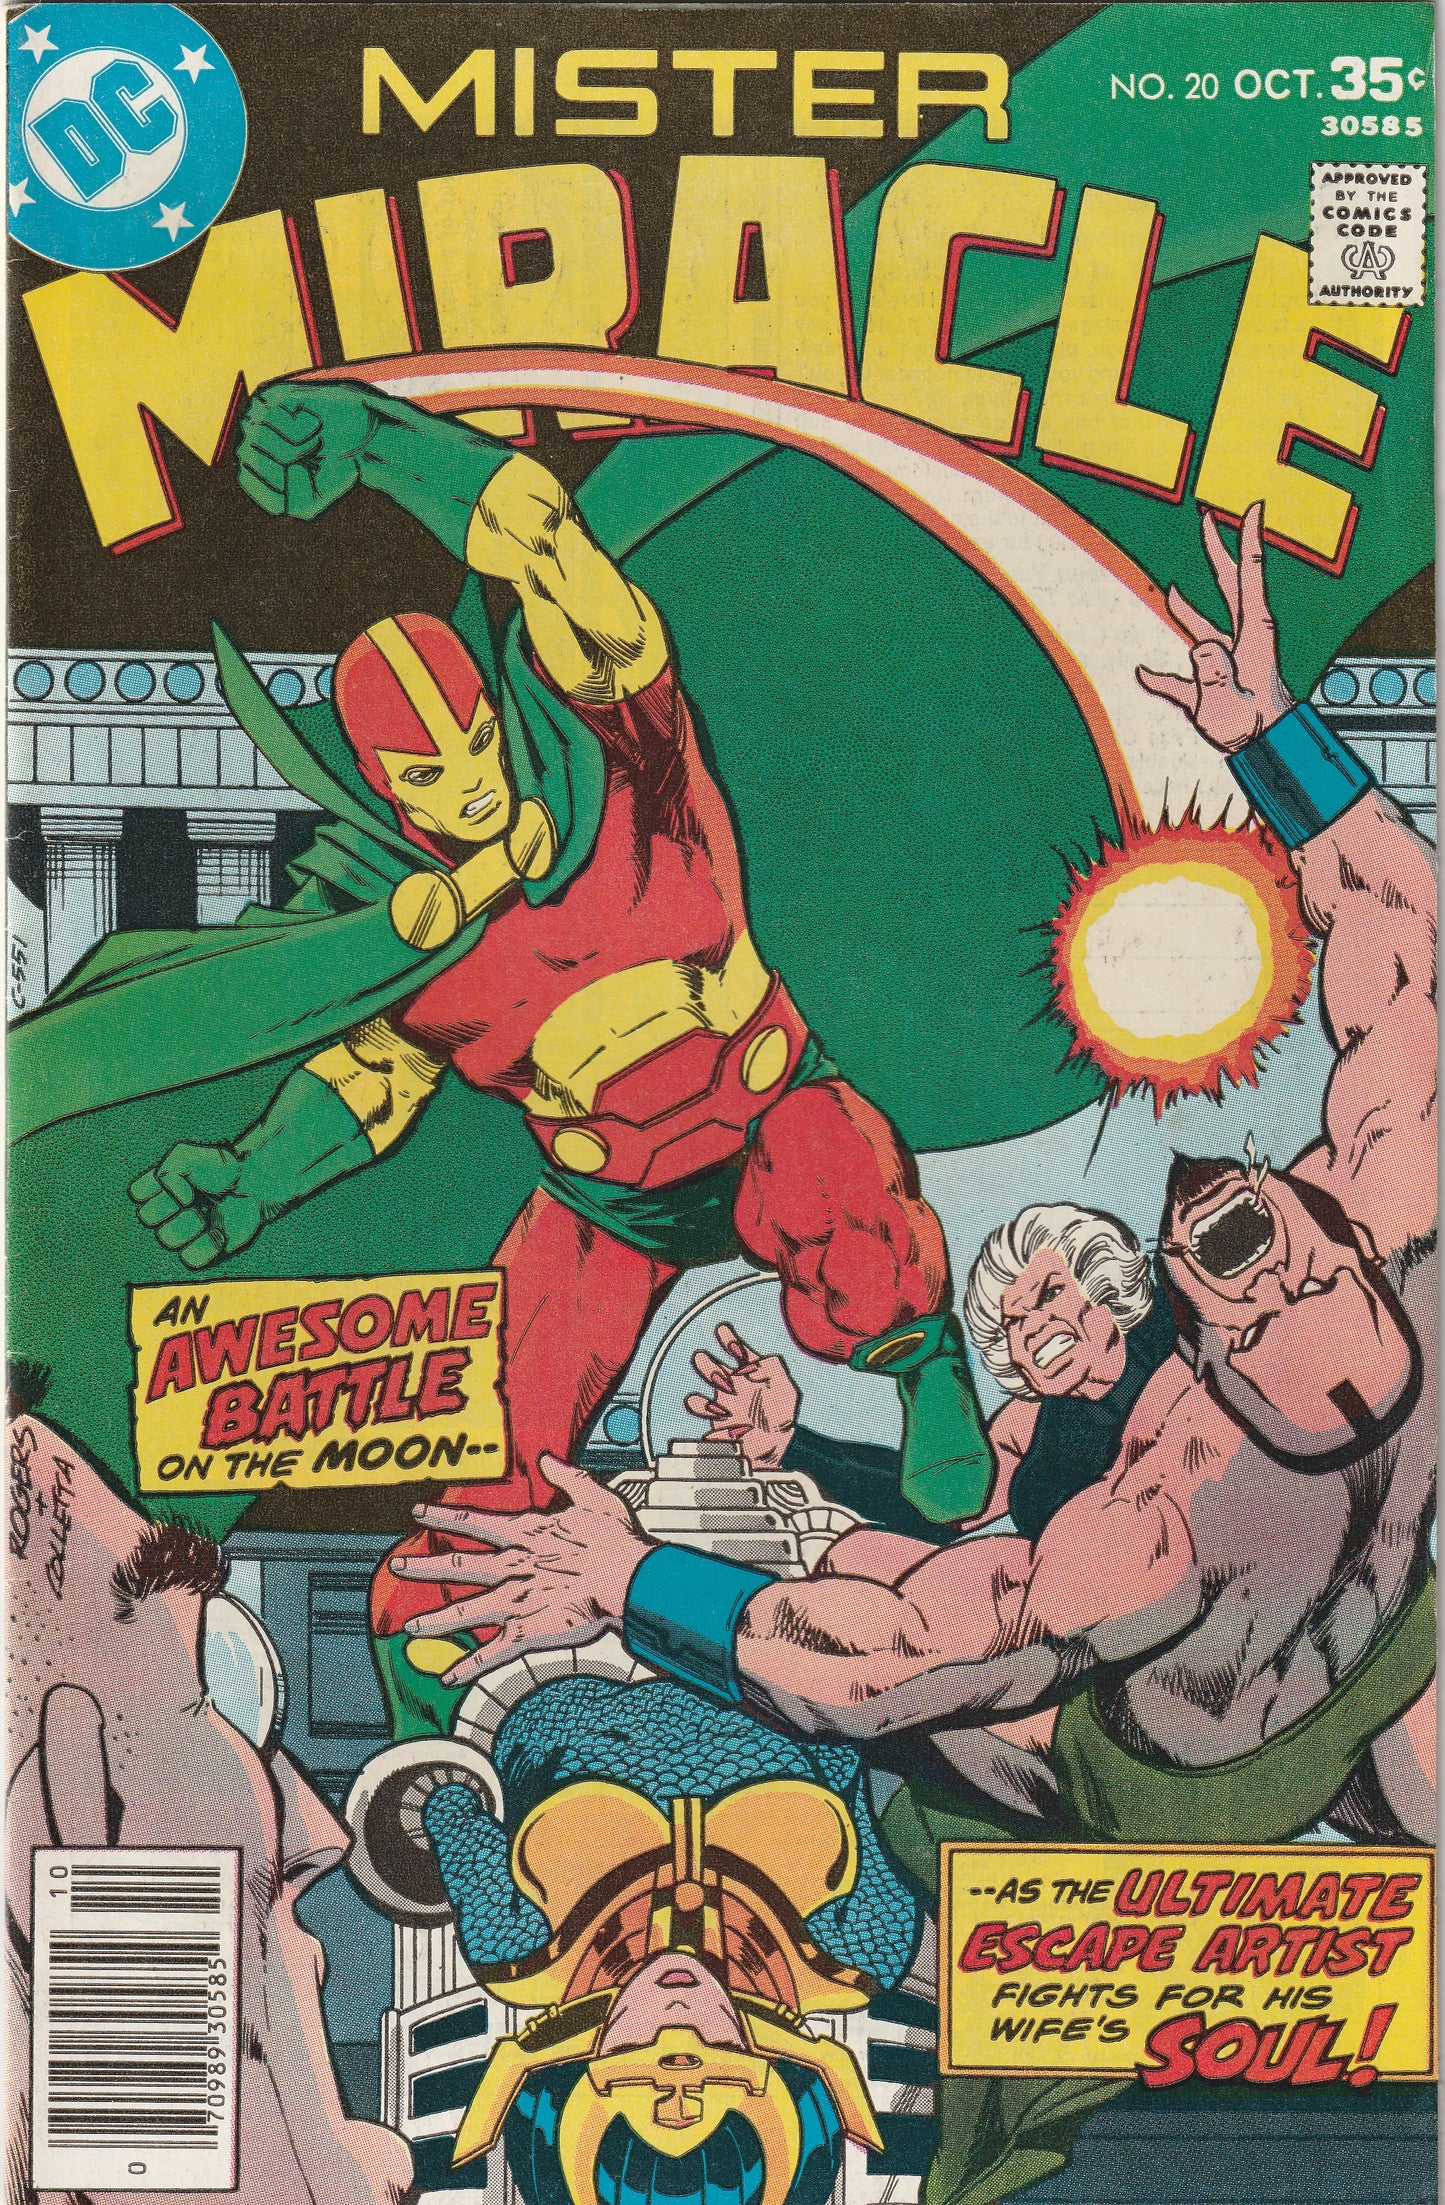 Mister Miracle #20 (1977)